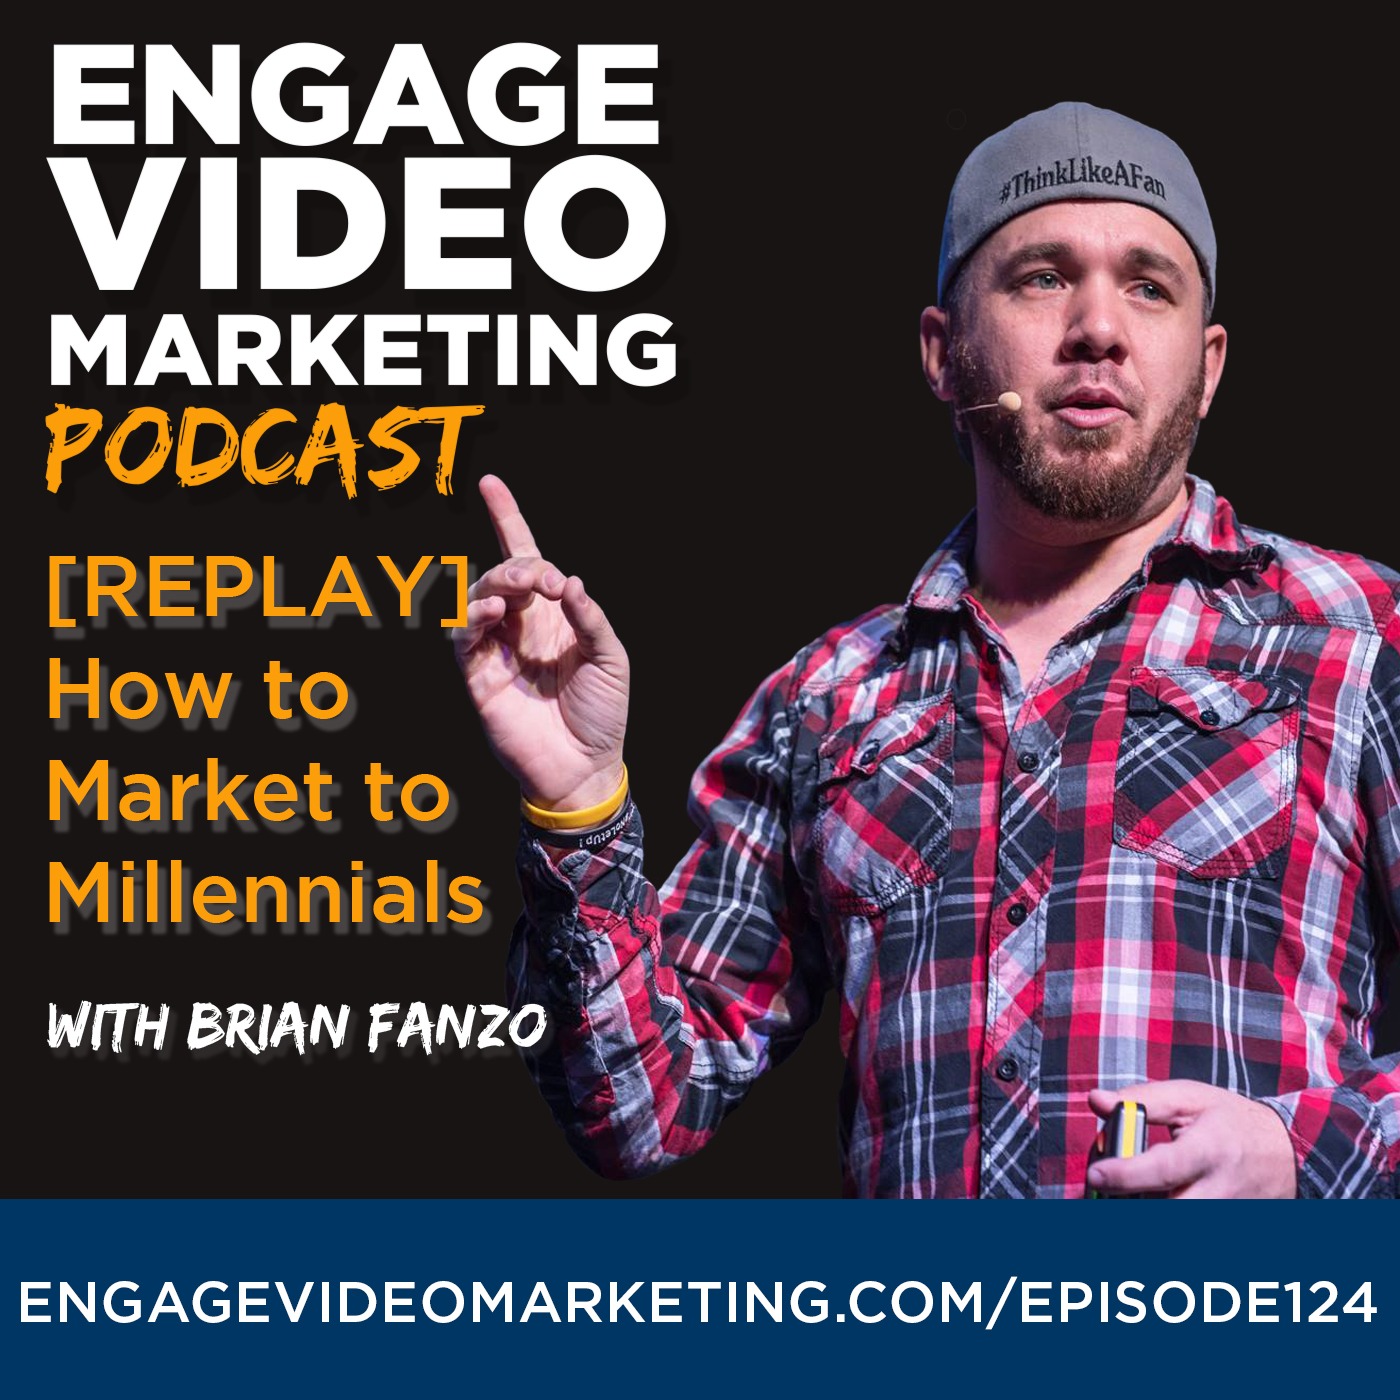 [REPLAY] How to Market to Millennials with Brian Fanzo